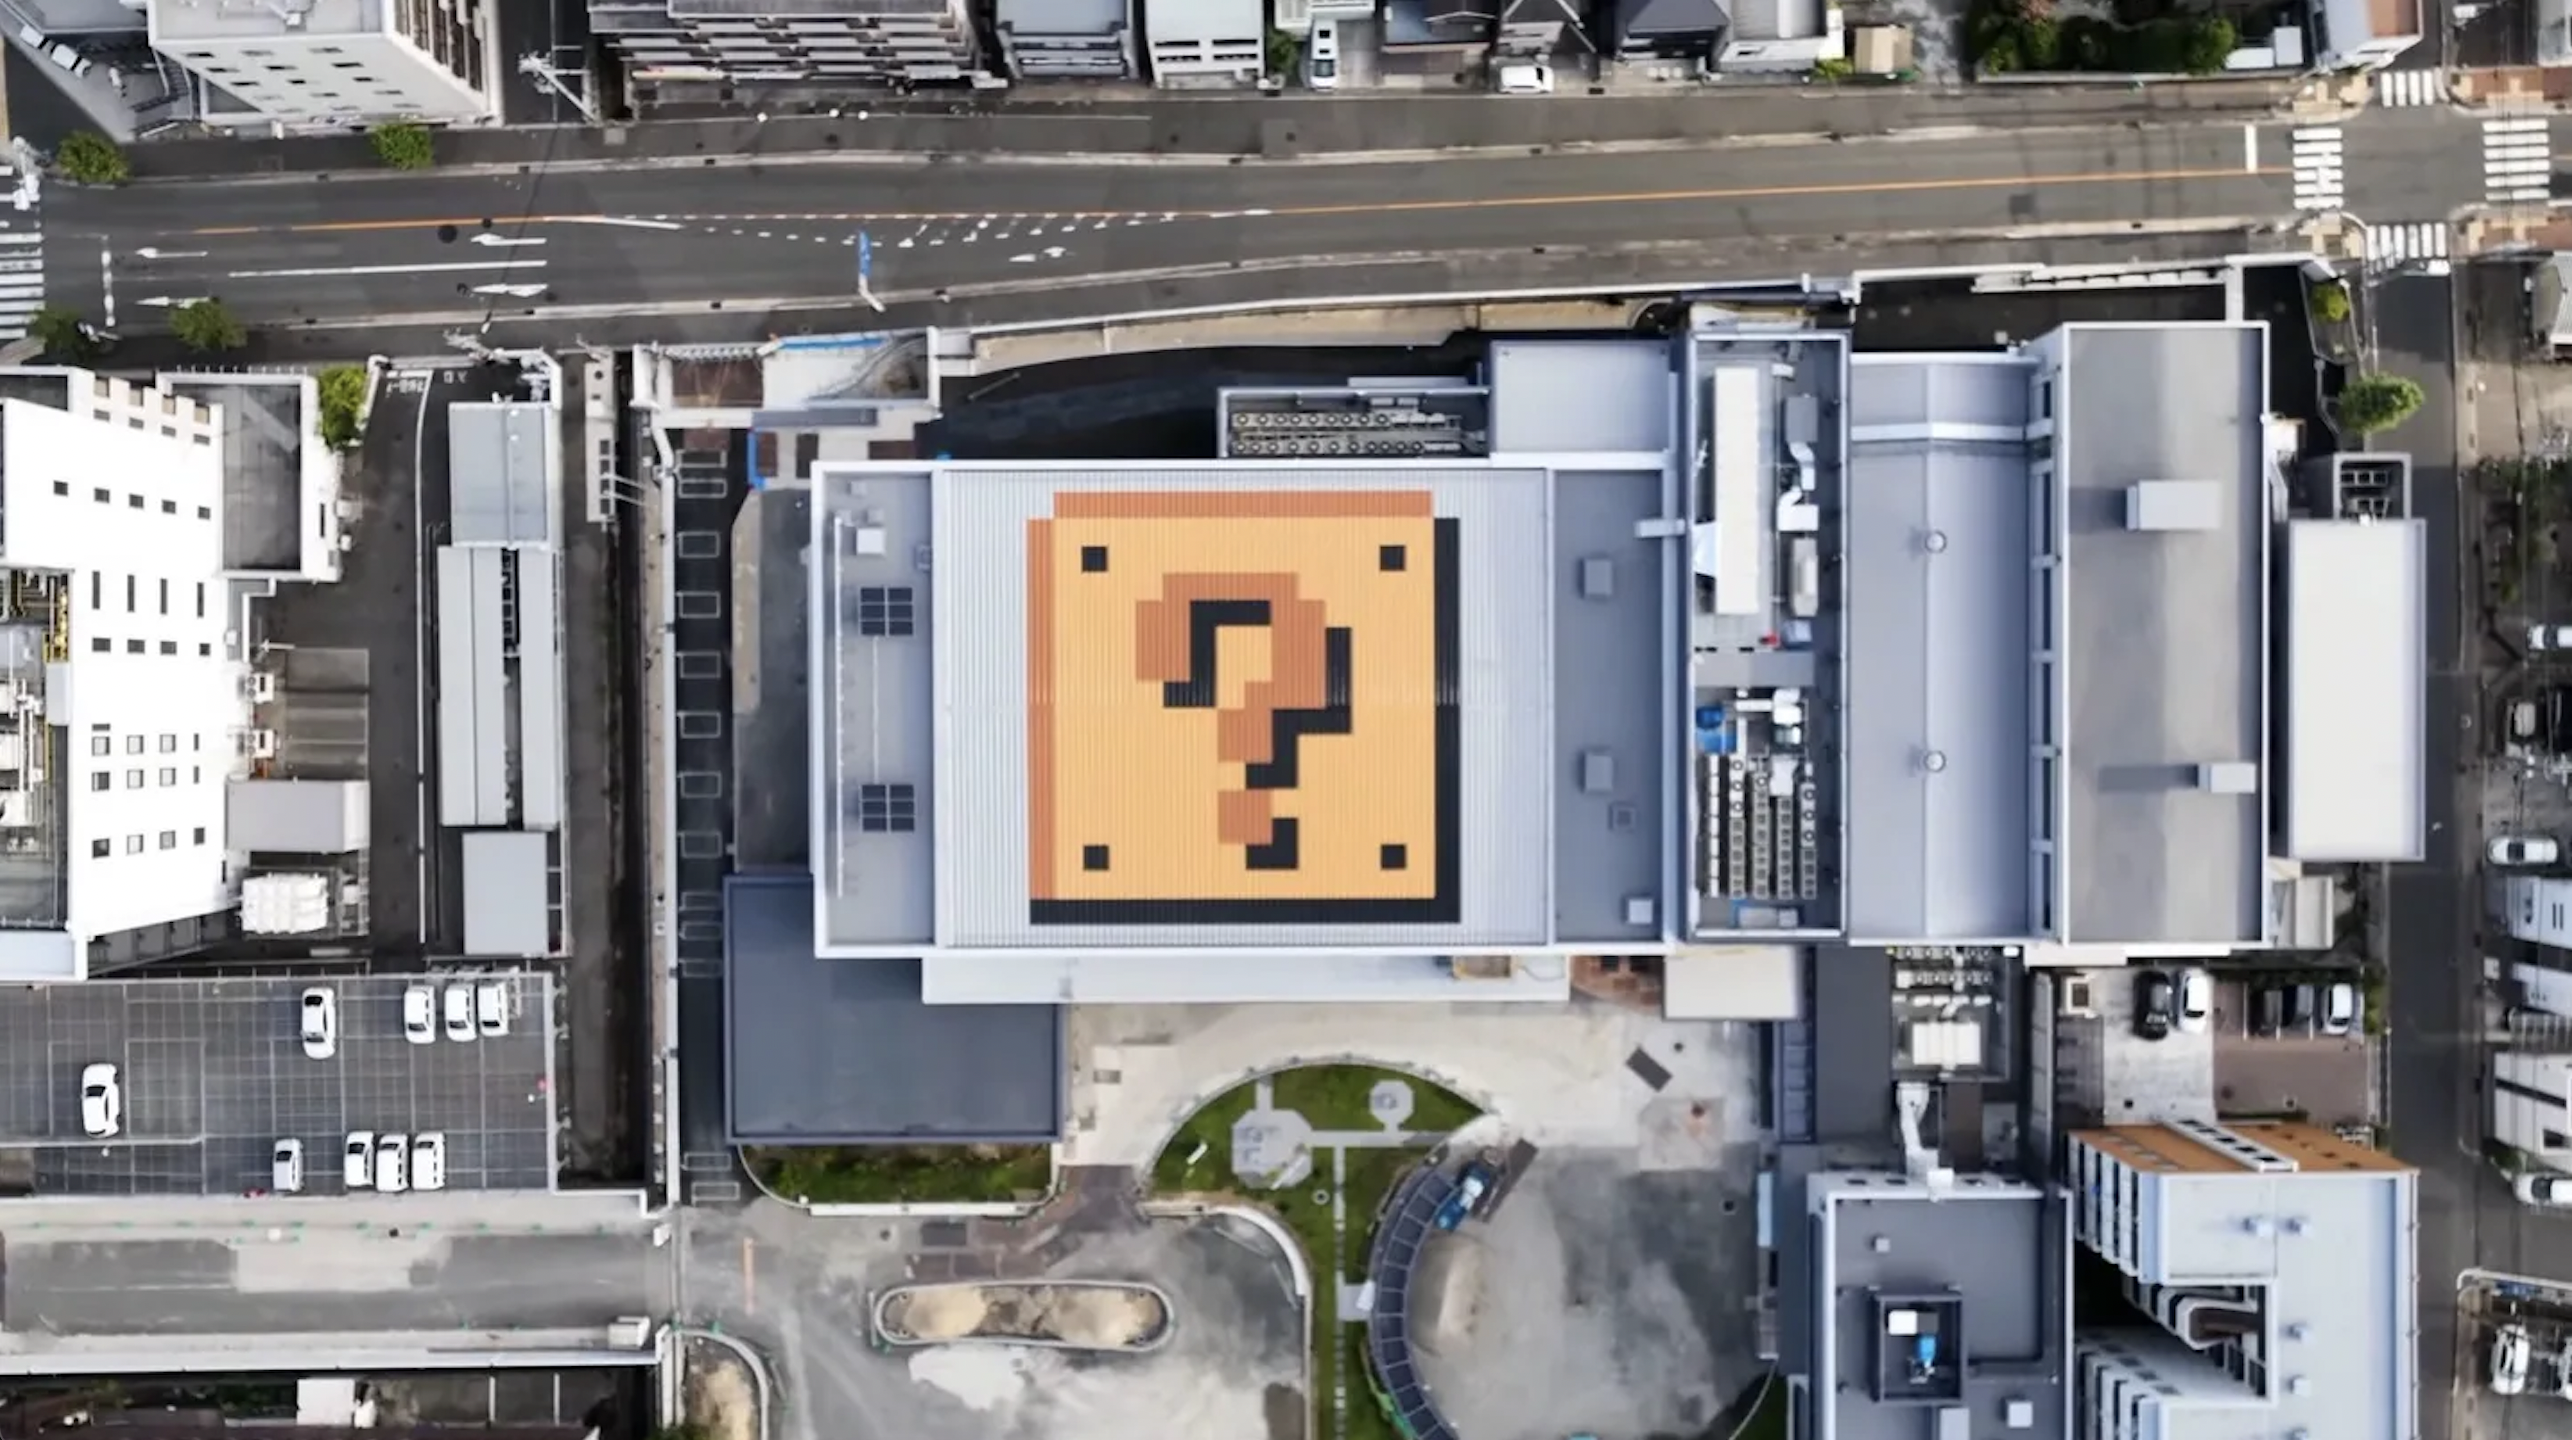 Overhead view of the Nintendo Museum